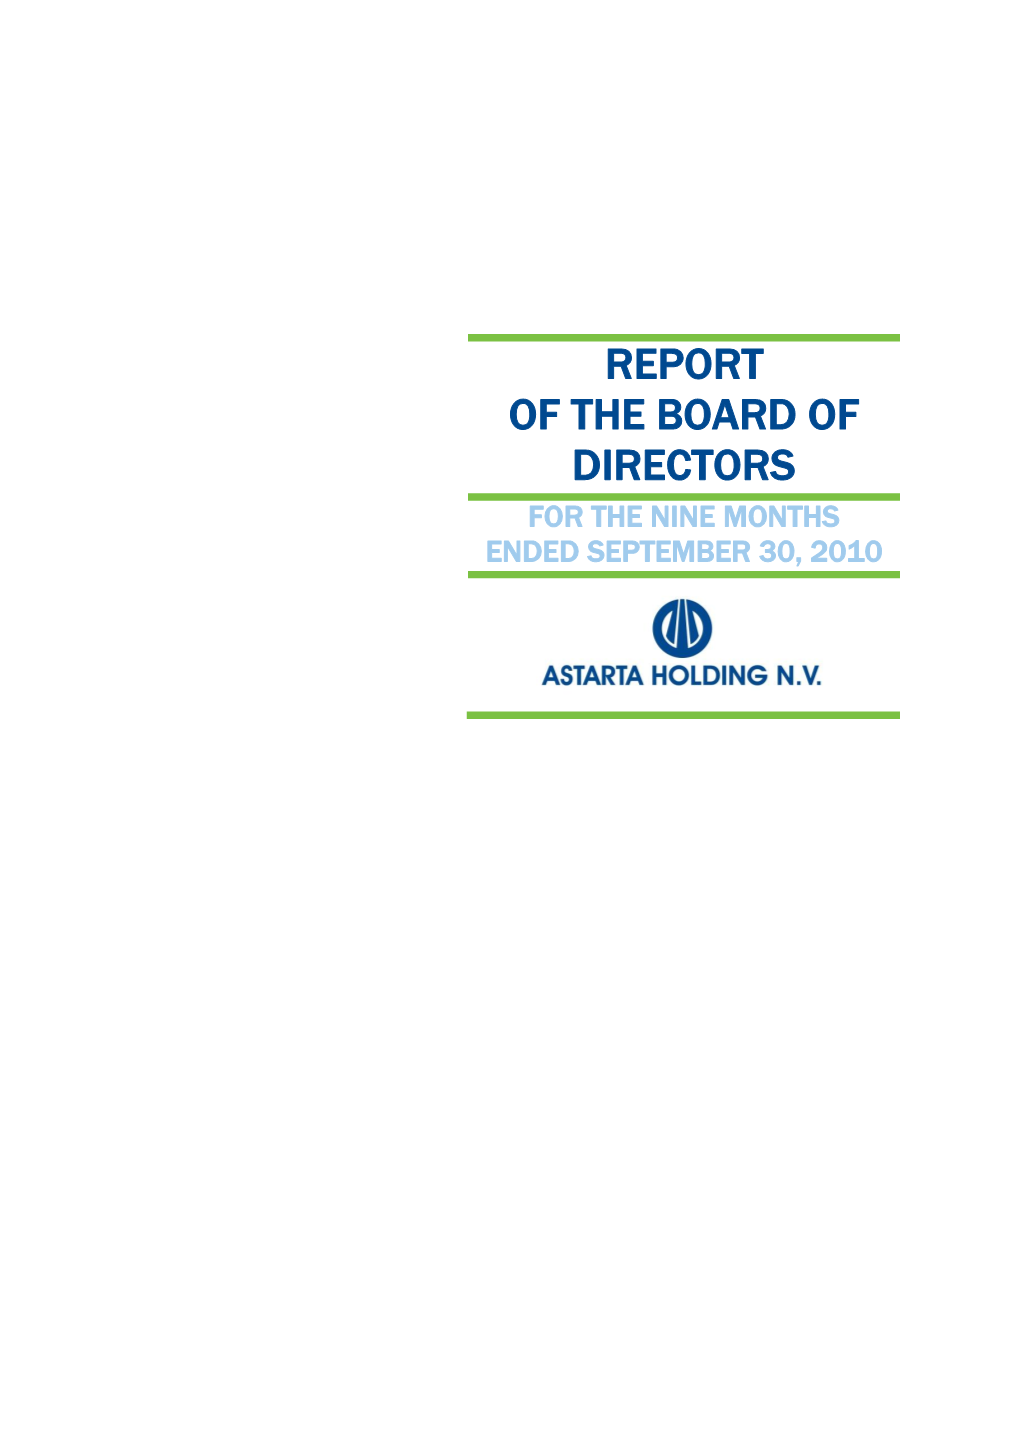 Report of the Board of Directors for the Nine Months Ended September 30, 2010